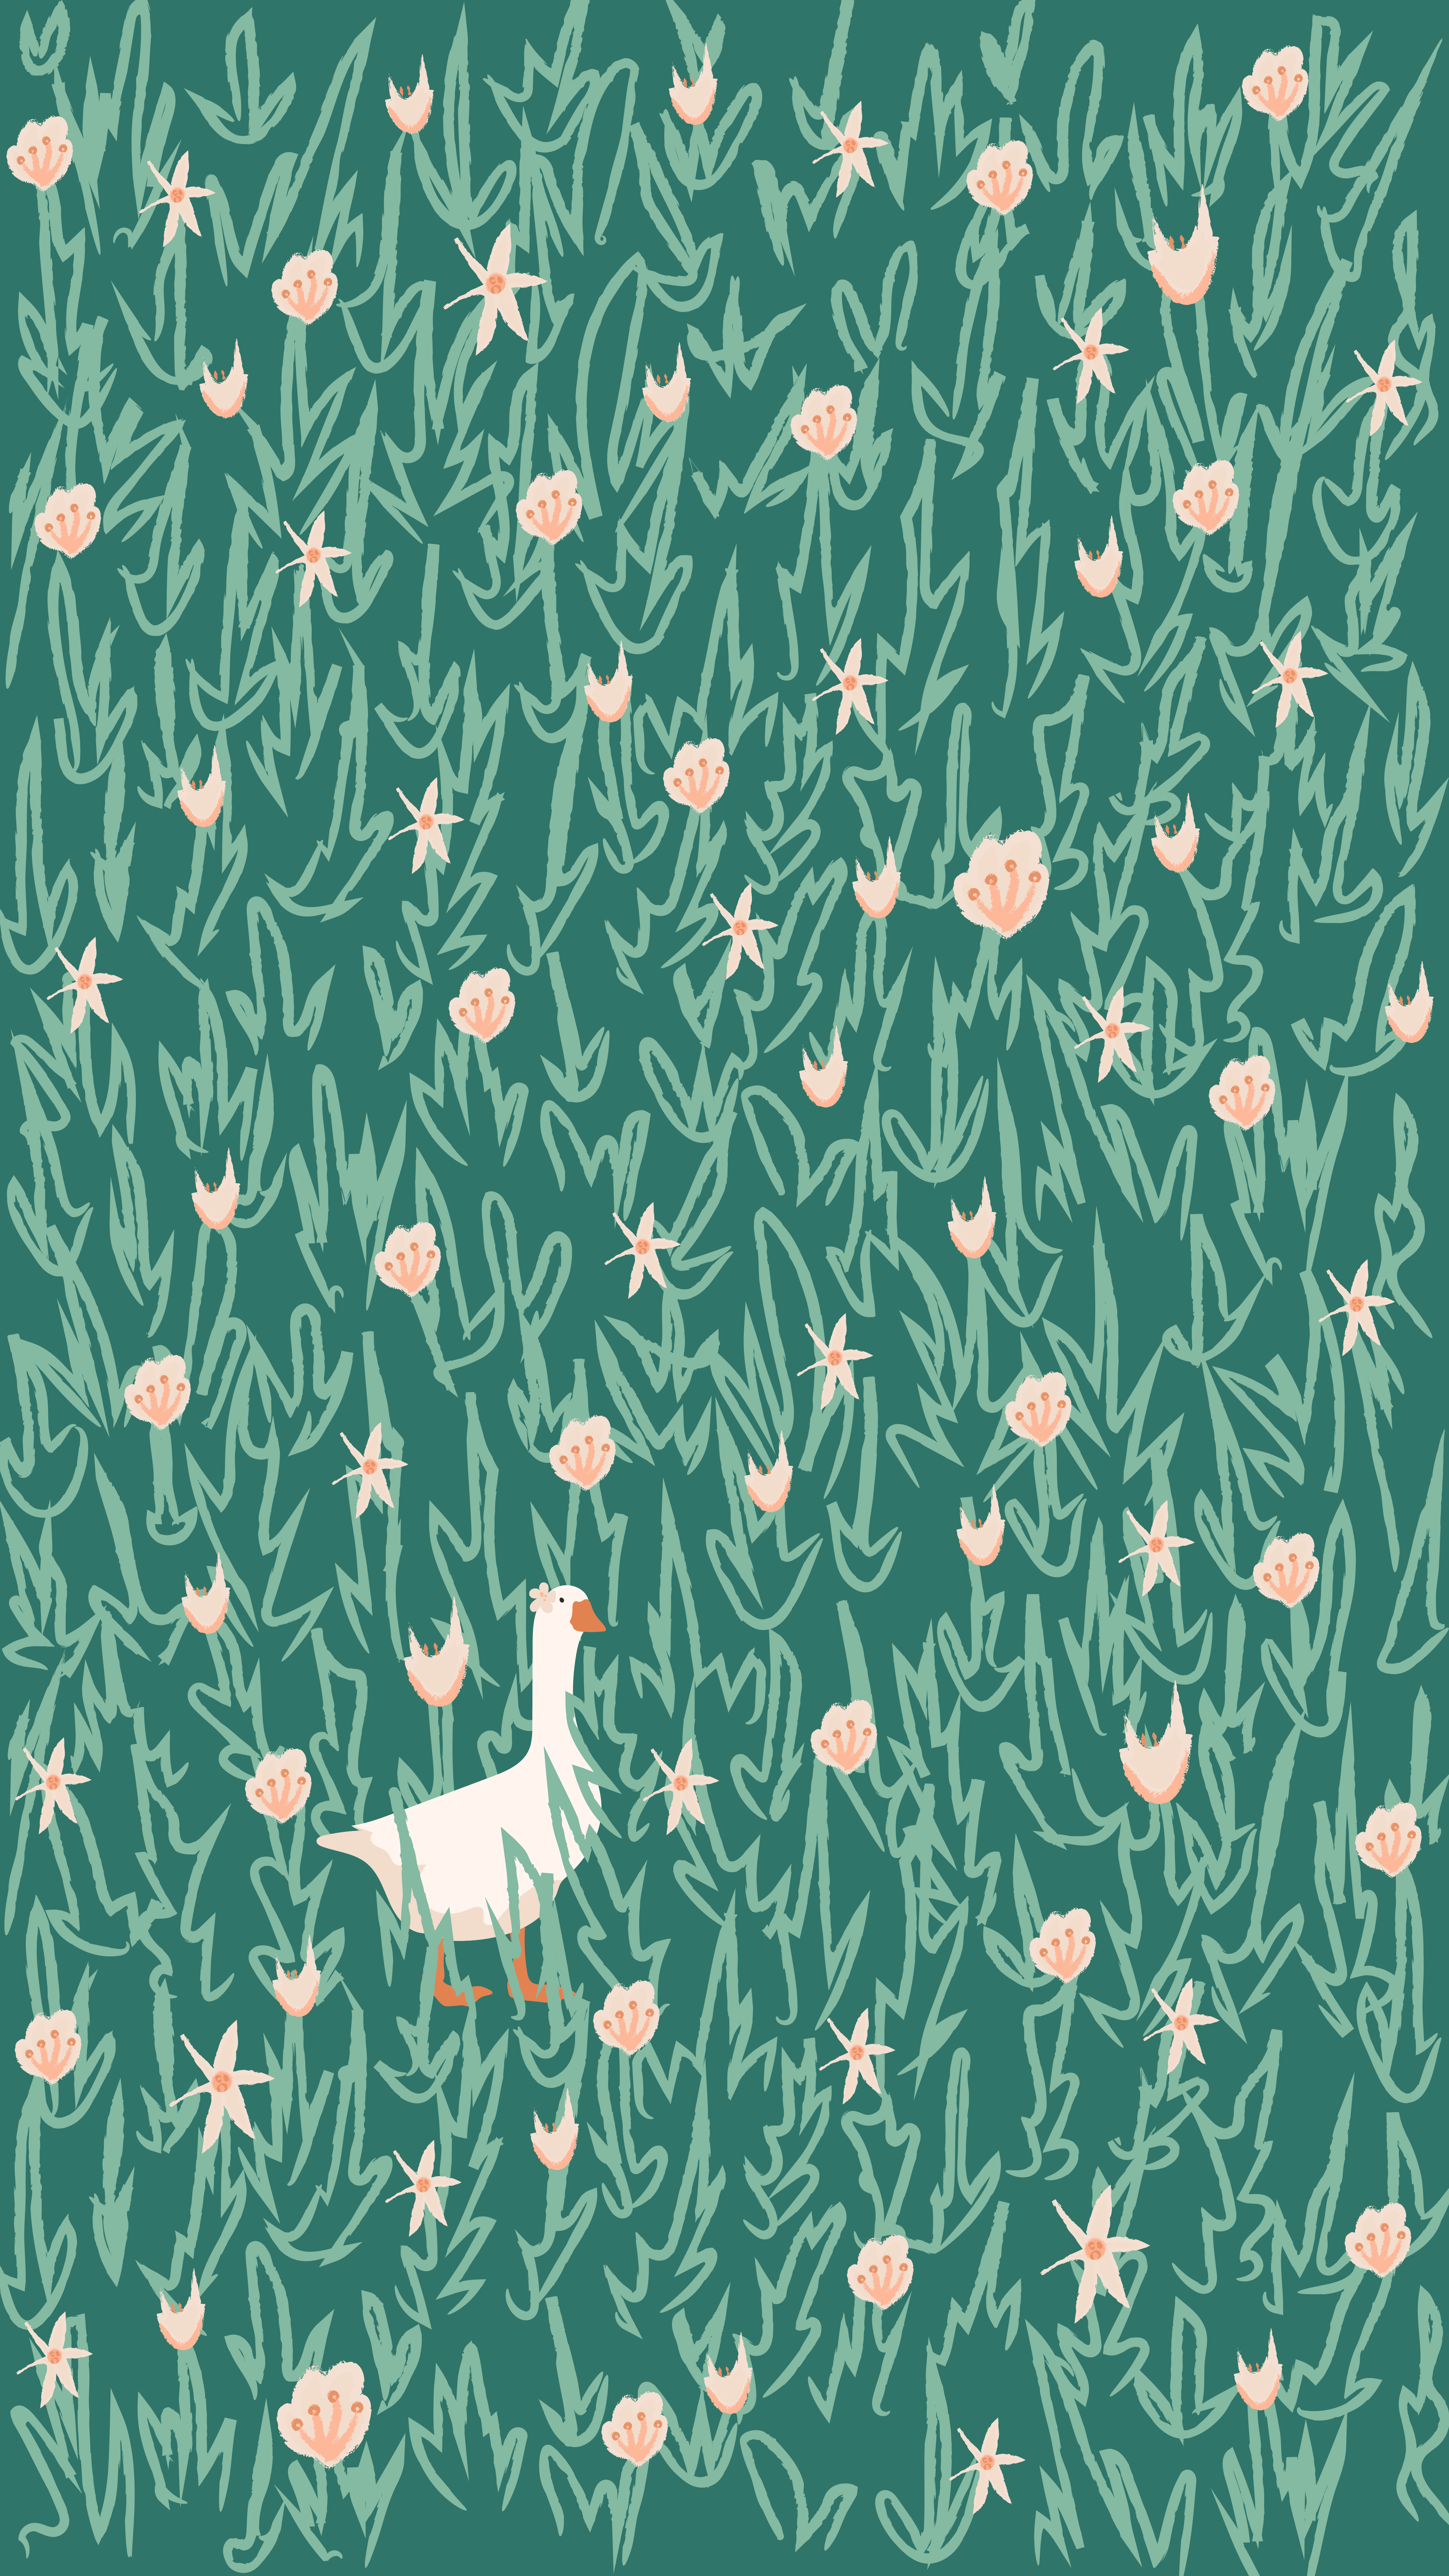 Flowers and Untitled Goose Background